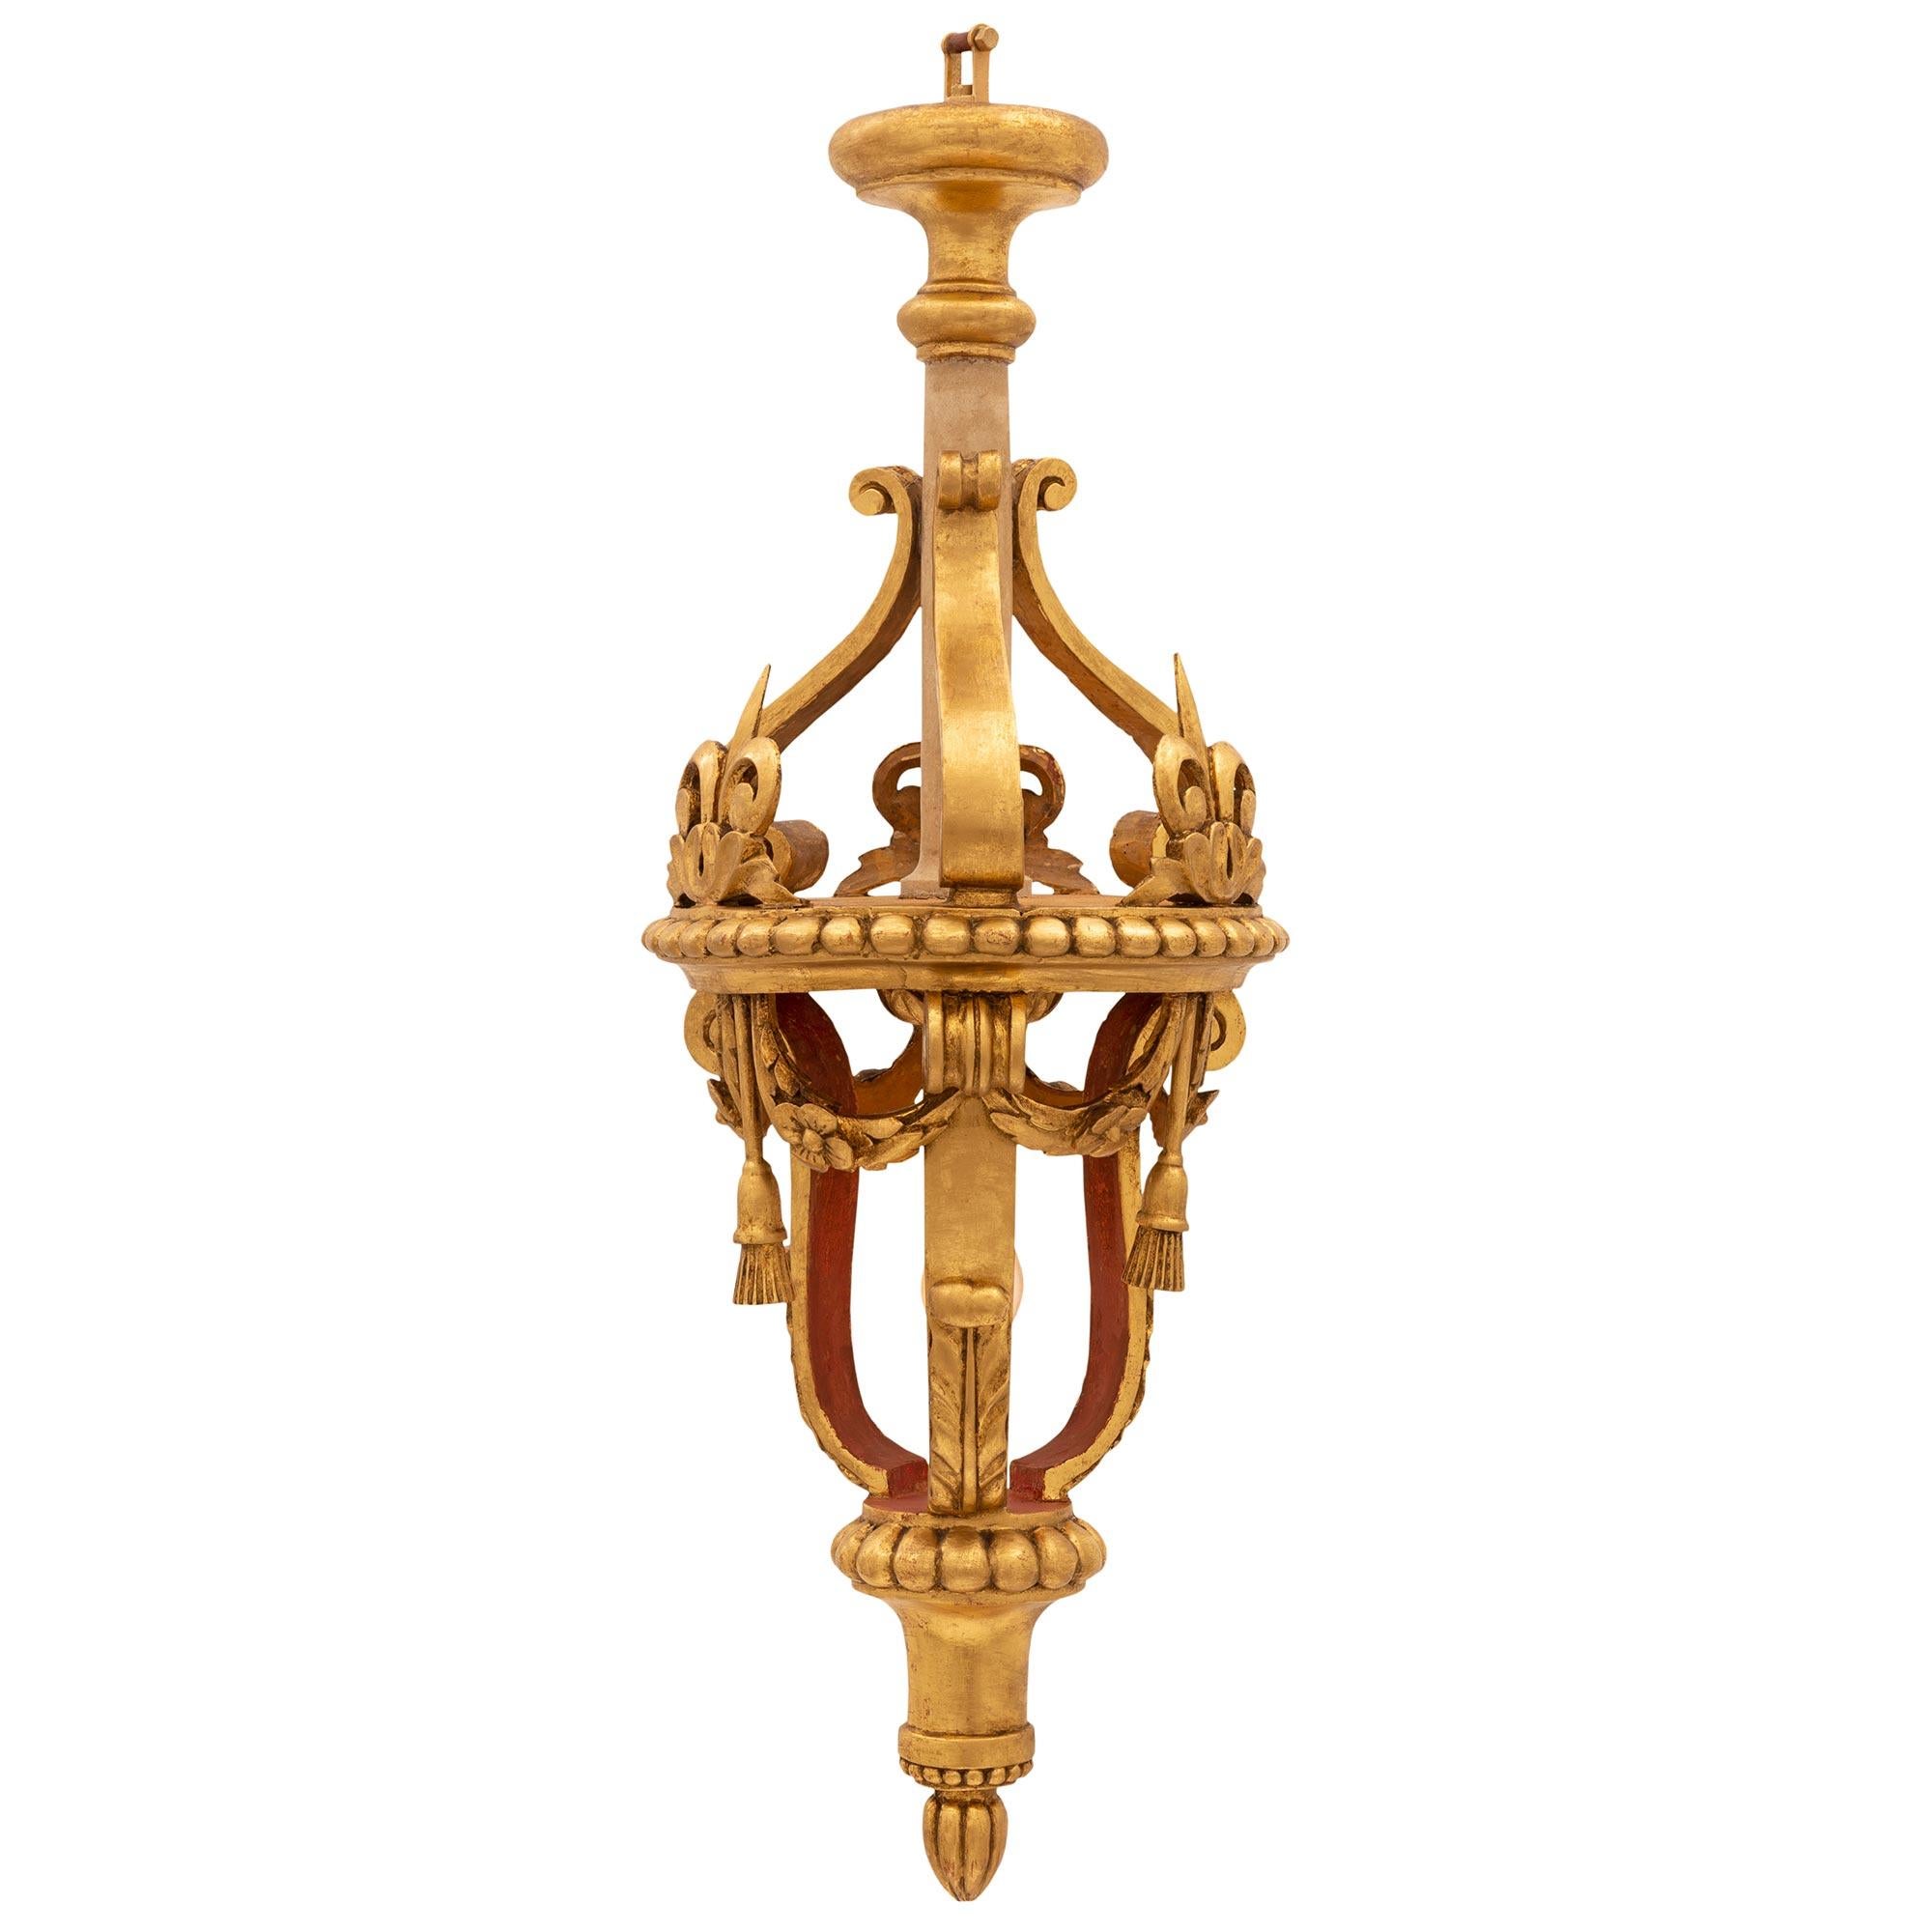 A lovely Italian 18th century Baroque st. giltwood lantern. The lantern is centered by a charming bottom foliate finial below an elegantly curved support and wrap around reeded band. Three scrolled supports lead upwards adorned with richly carved